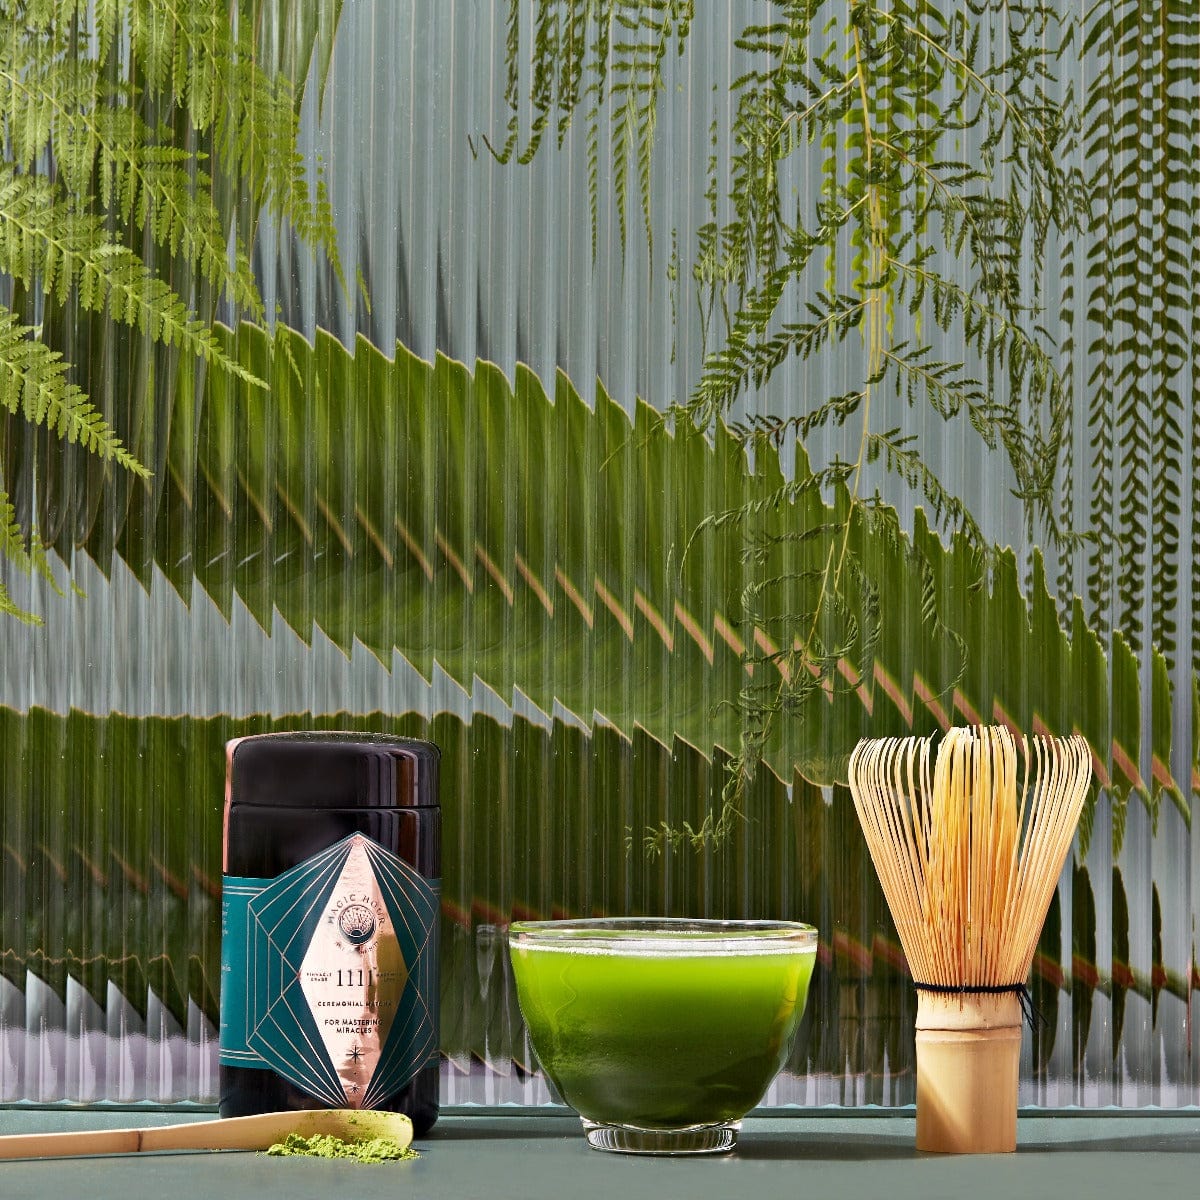 A Matcha 1111 : Highest Grade of Ceremonial Matcha kit on a green surface with a background of ferns. It includes a matcha container, a glass bowl with matcha tea, a bamboo whisk, and a small wooden spoon with matcha powder. The scene has a calm and natural ambiance, perfect for enjoying Magic Hour's organic tea selection.